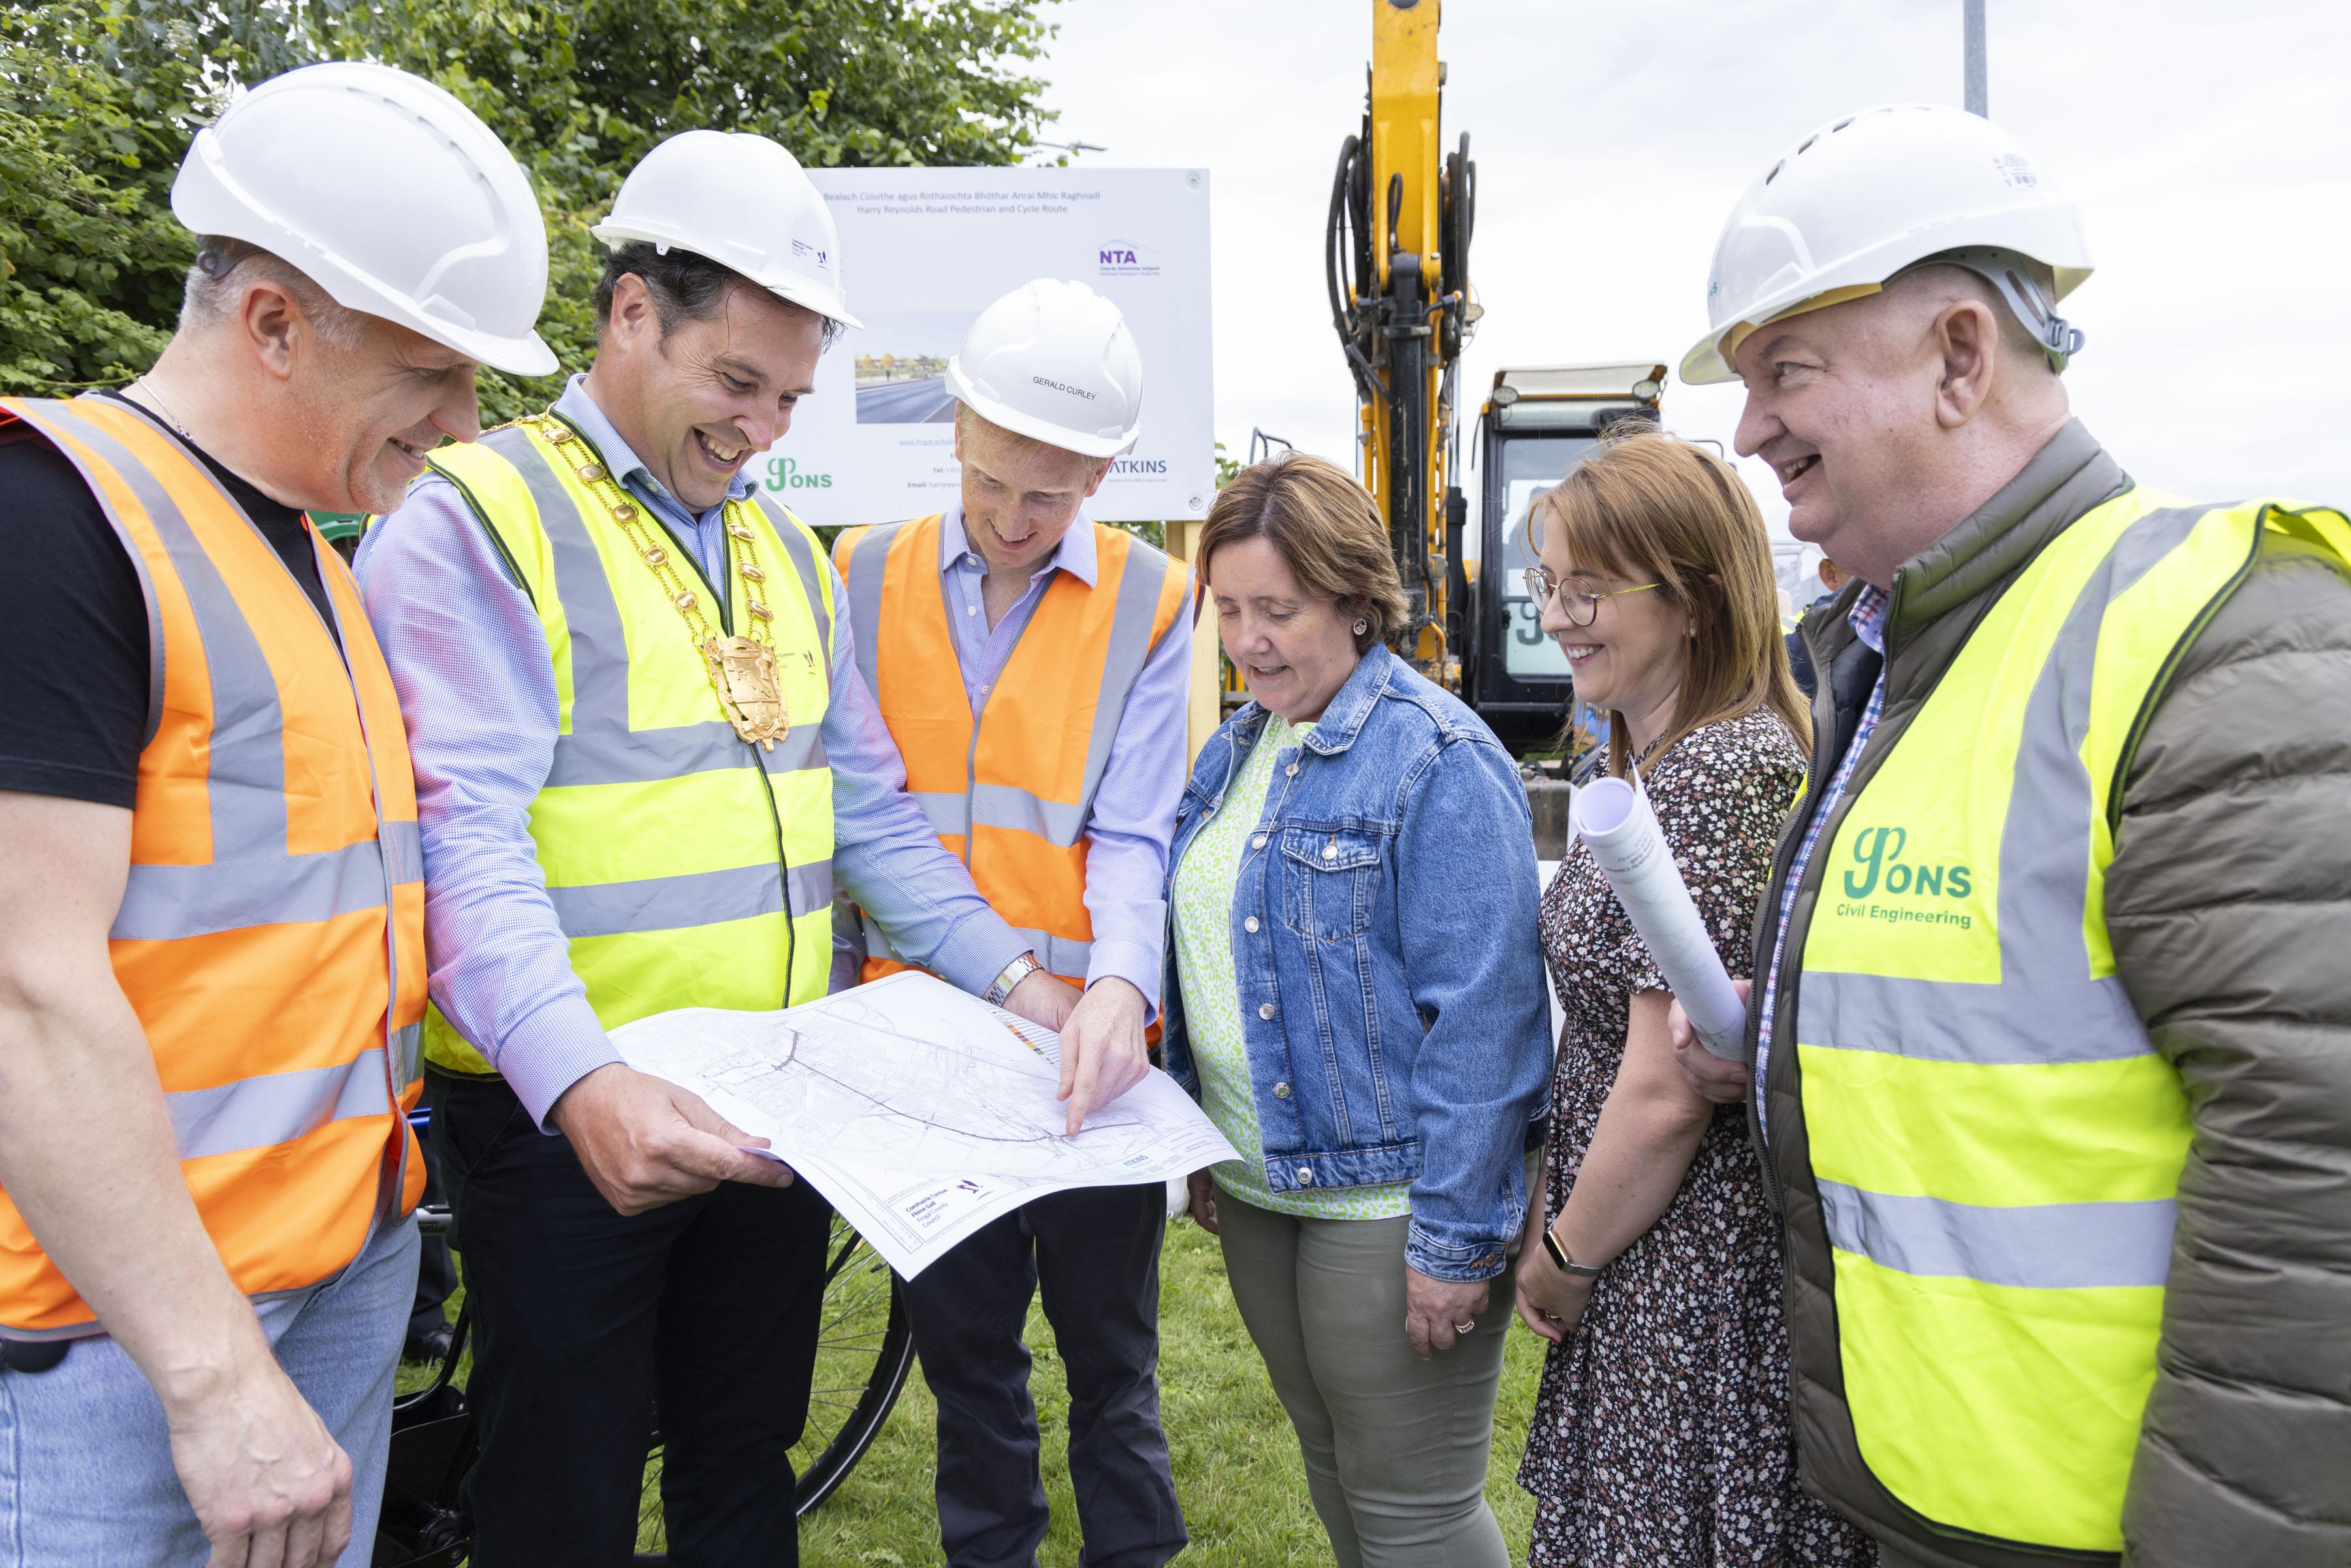 Local Cllrs inspect plans with Fingal team and Mayor of Fingal